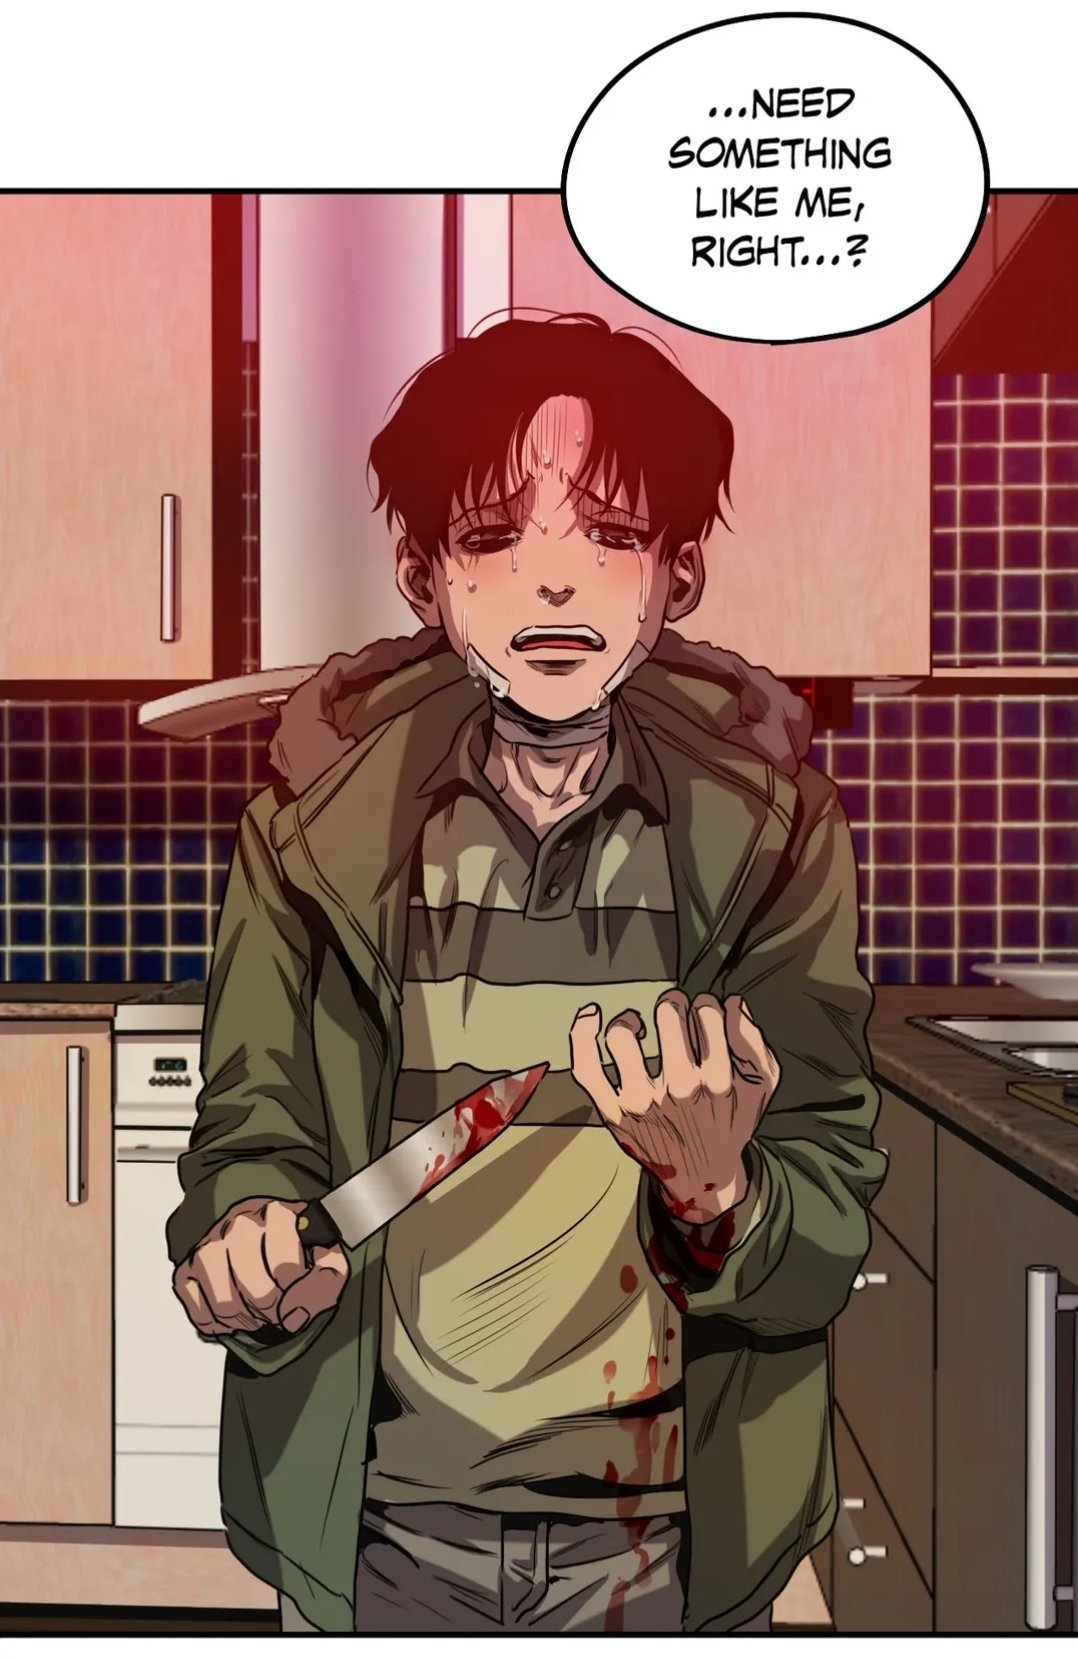 Lezhin Comics - Killing Stalking is being made into TV